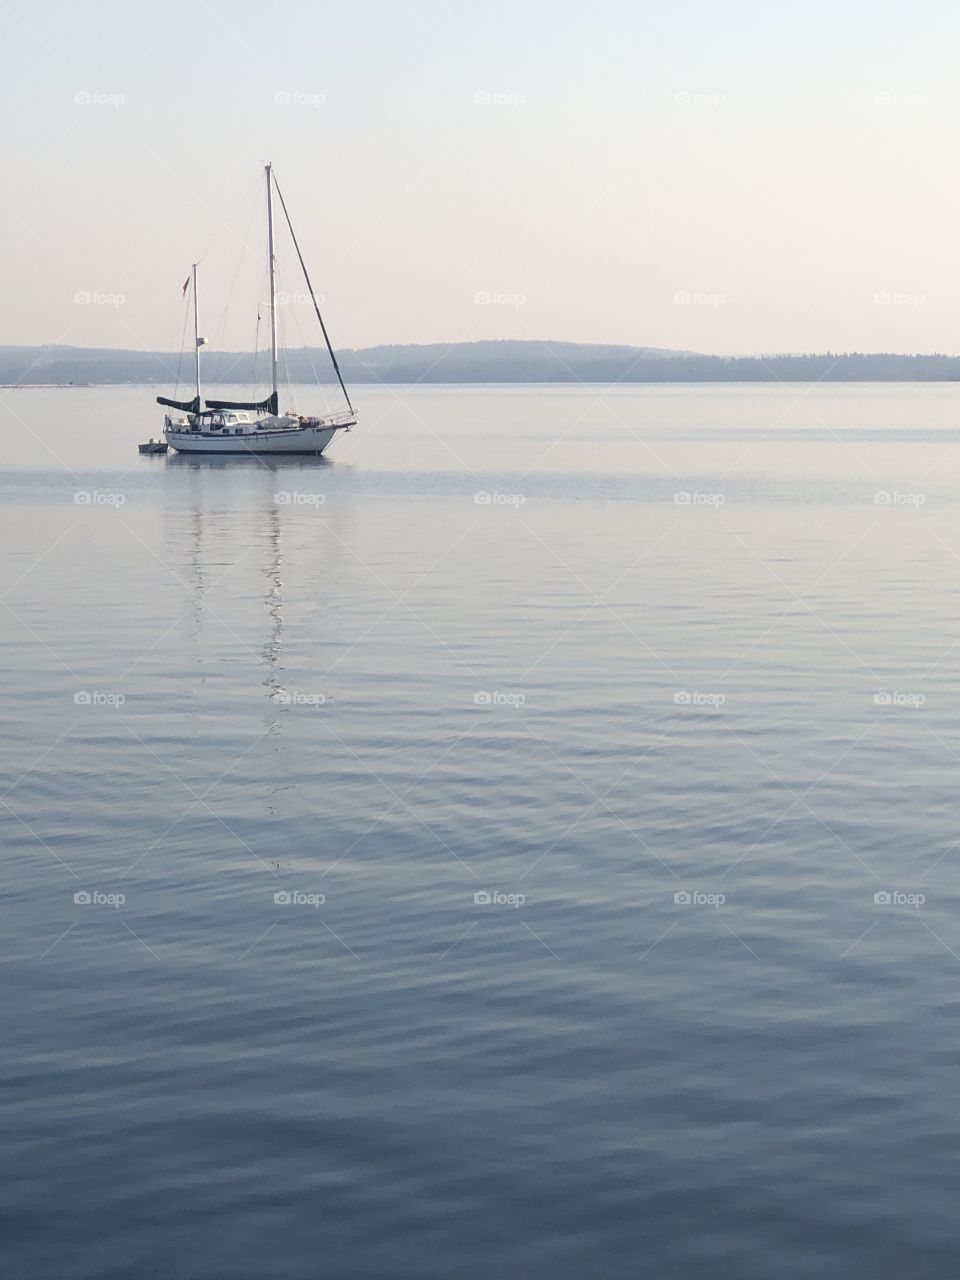 Sail boat on water. Sky, boat, and water are all soft blue hues.